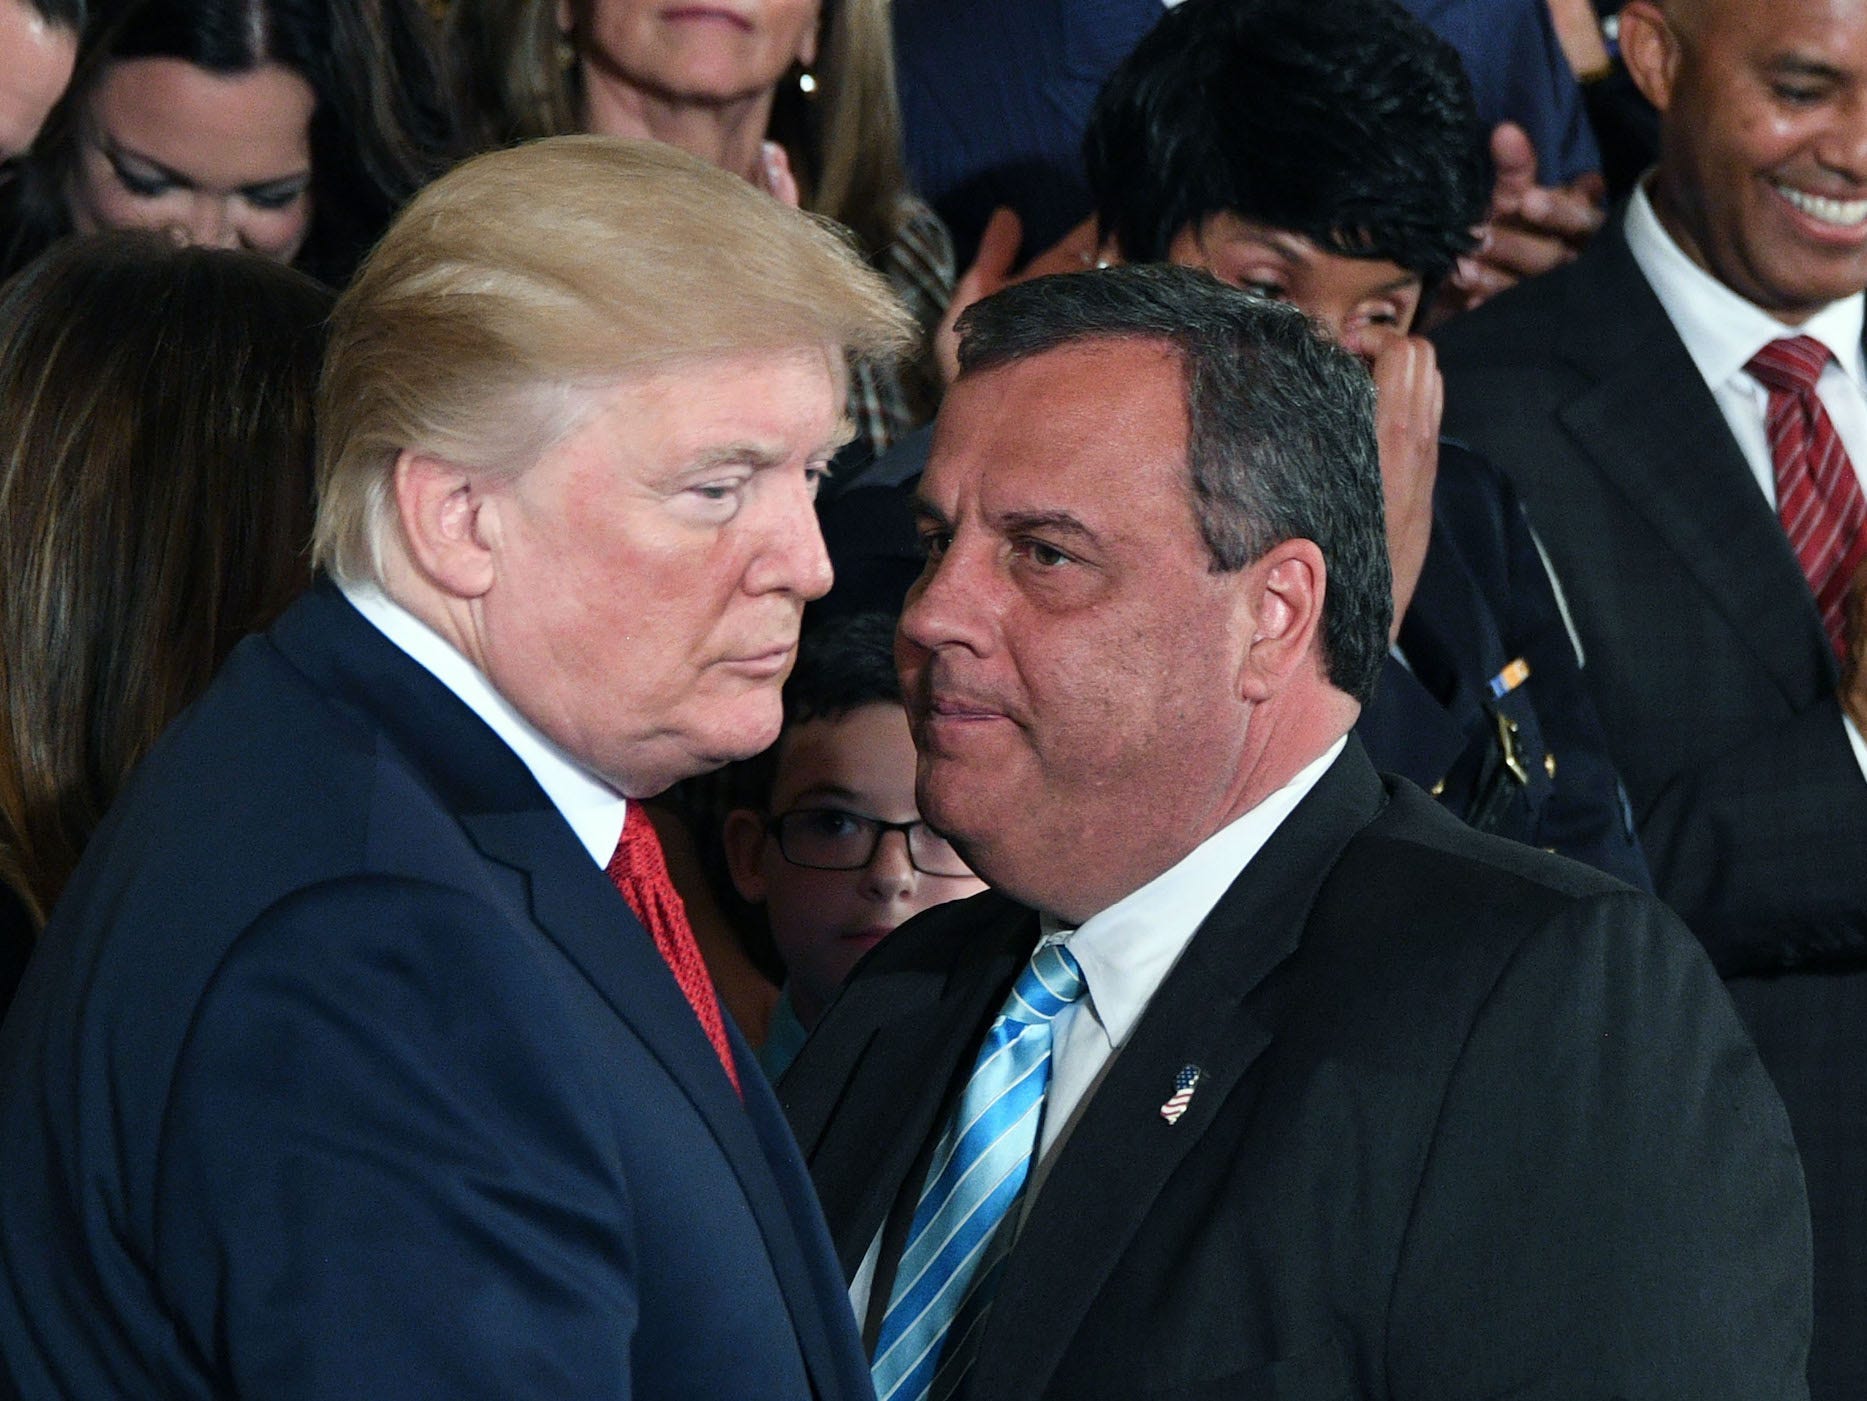 Former New Jersey Gov. Chris Christie speaks with former President Donald Trump at a White House event on October 26, 2017.